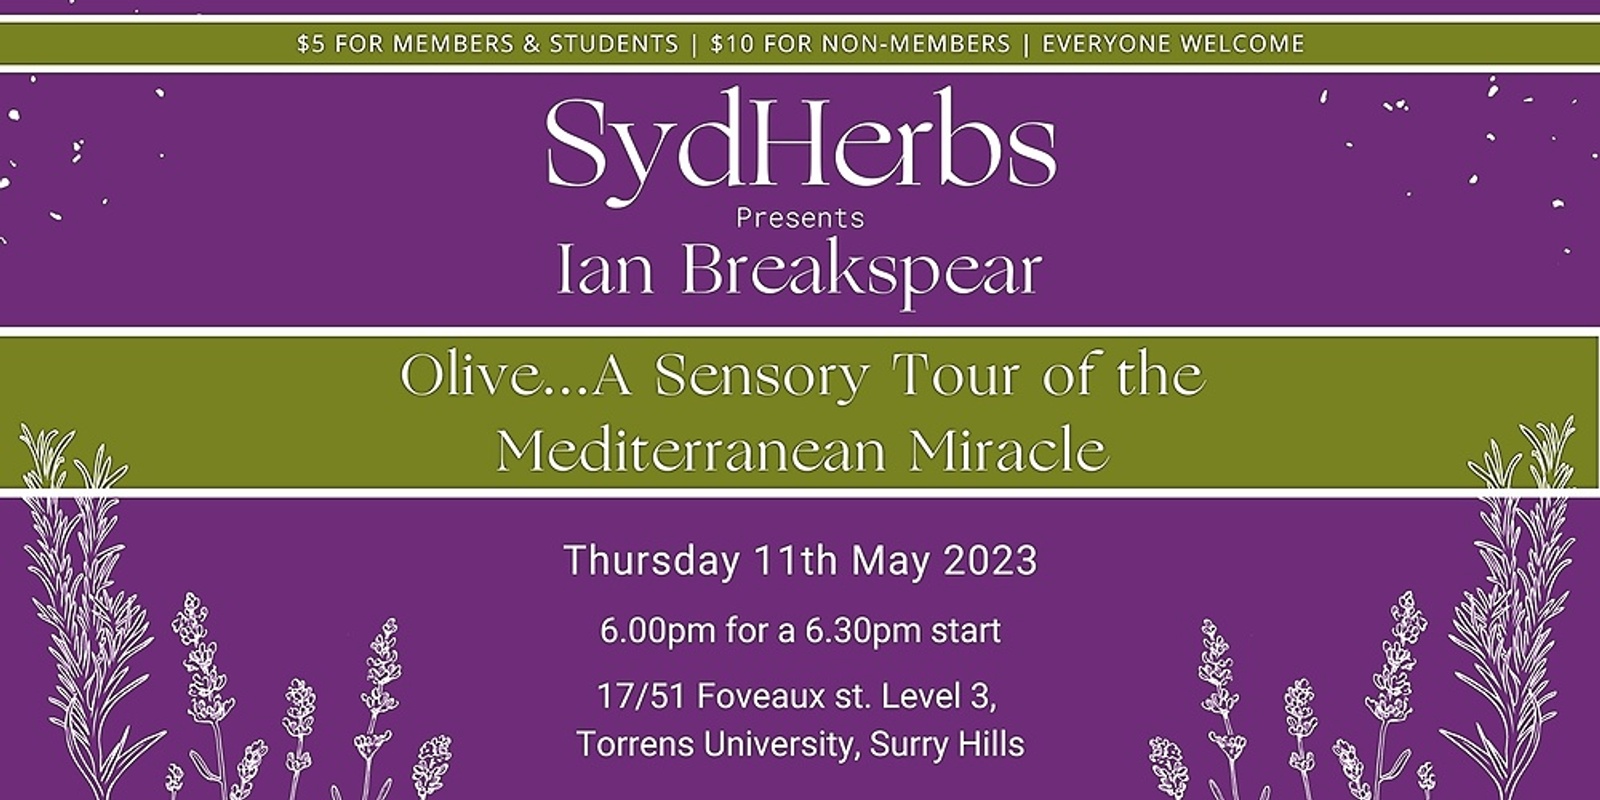 Banner image for SydHerbs Presents Ian Breakspear - Olive...A Sensory Tour of the Mediterranean Miracle